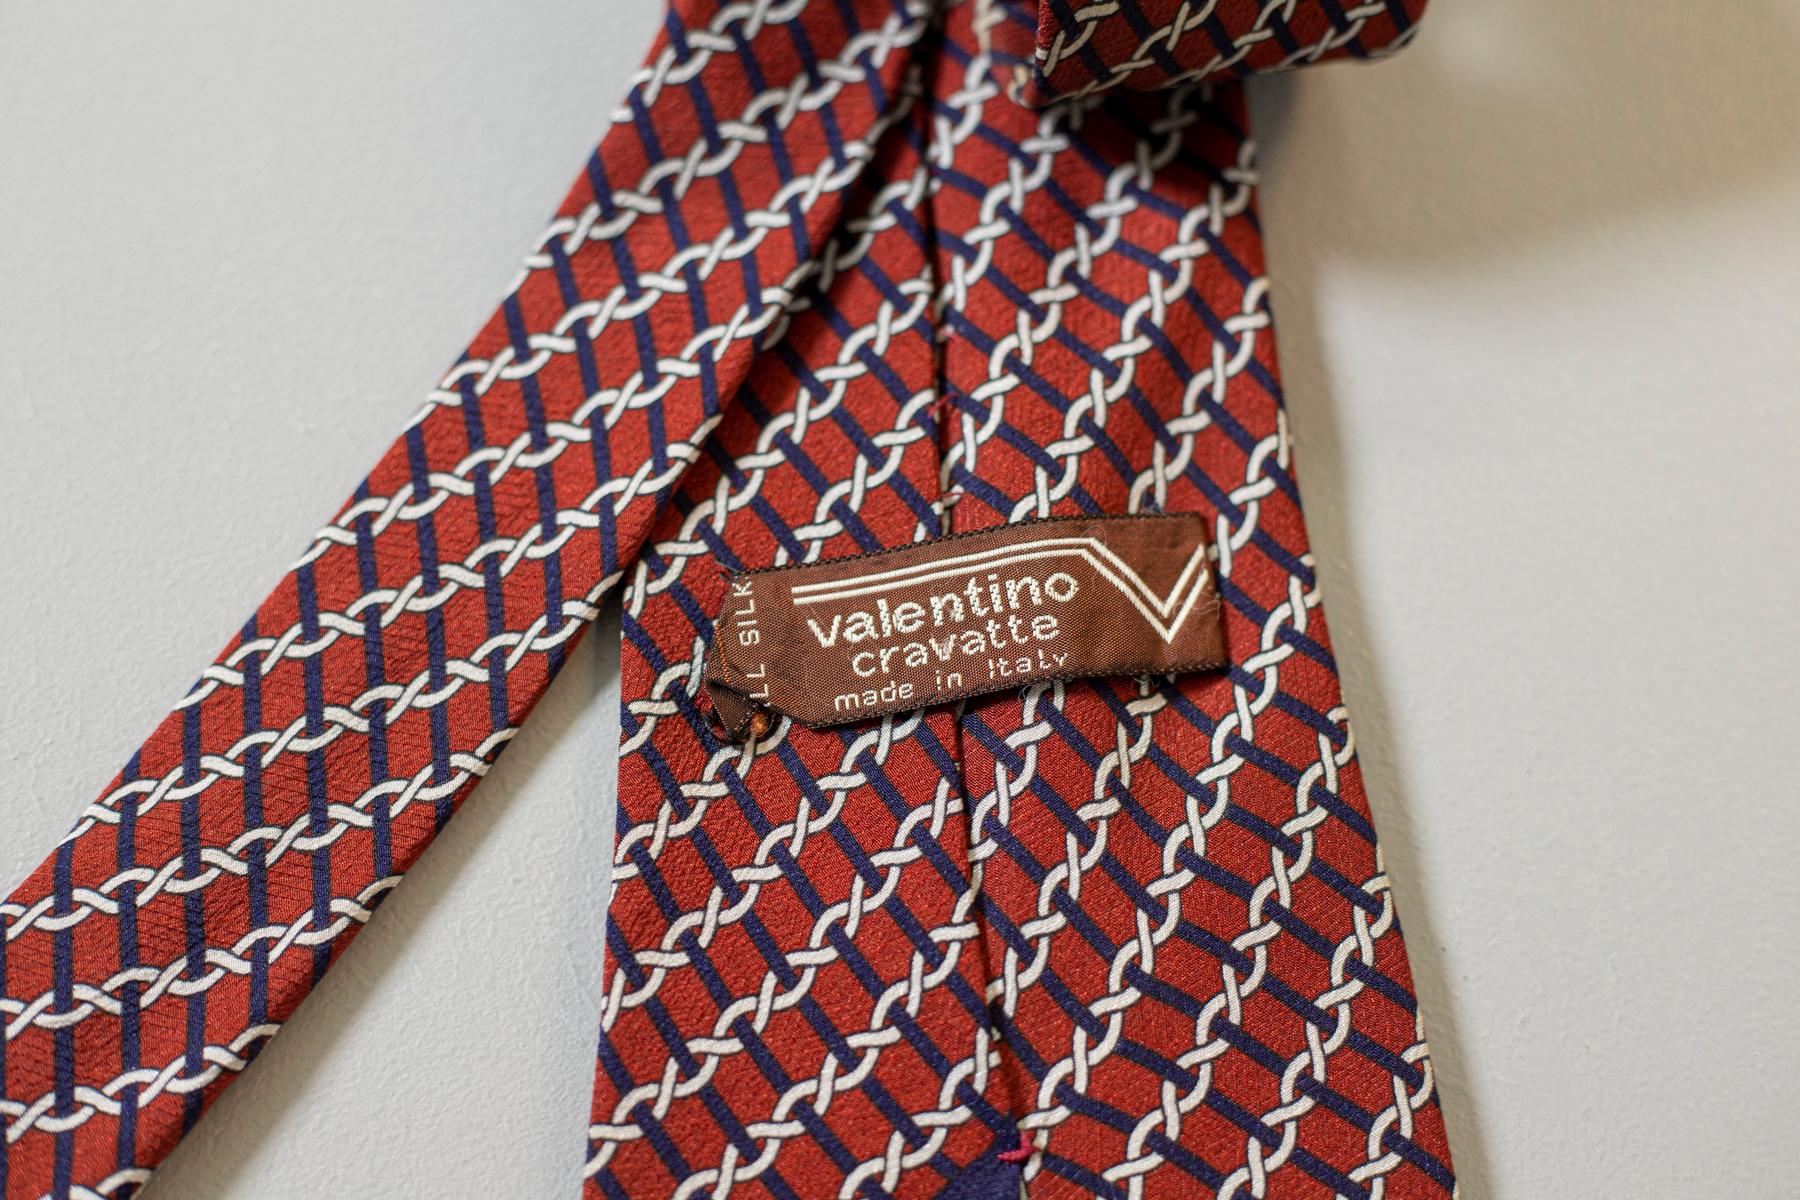 Decorated with blue stripes and white chain on an intense red background, this all-silk tie was designed by Valentino and made in Italy. It is classy and fine, yet original and unique: perfect for everyone who wants to add a touch of colour on a